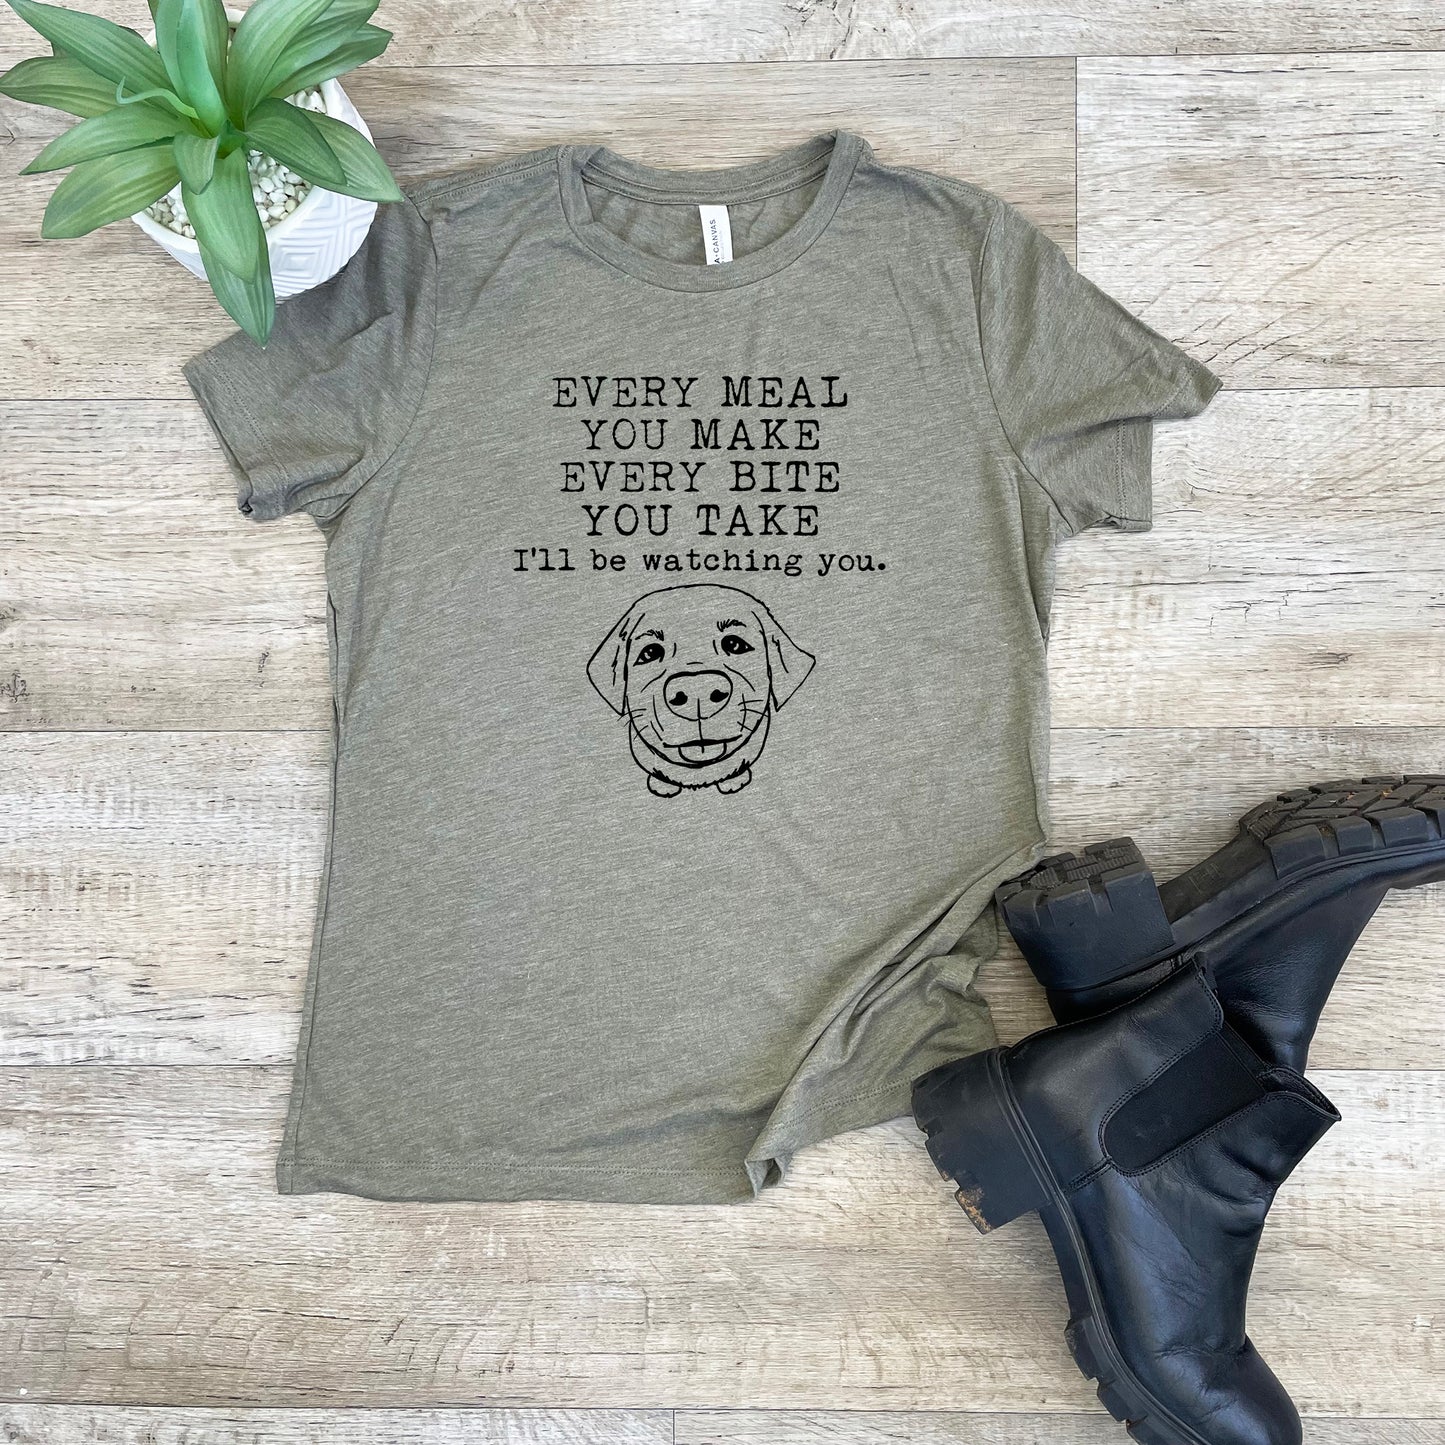 Every Meal You Make, Every Bite You Take, I'll Be Watching You - Women's Crew Tee - Olive or Dusty Blue